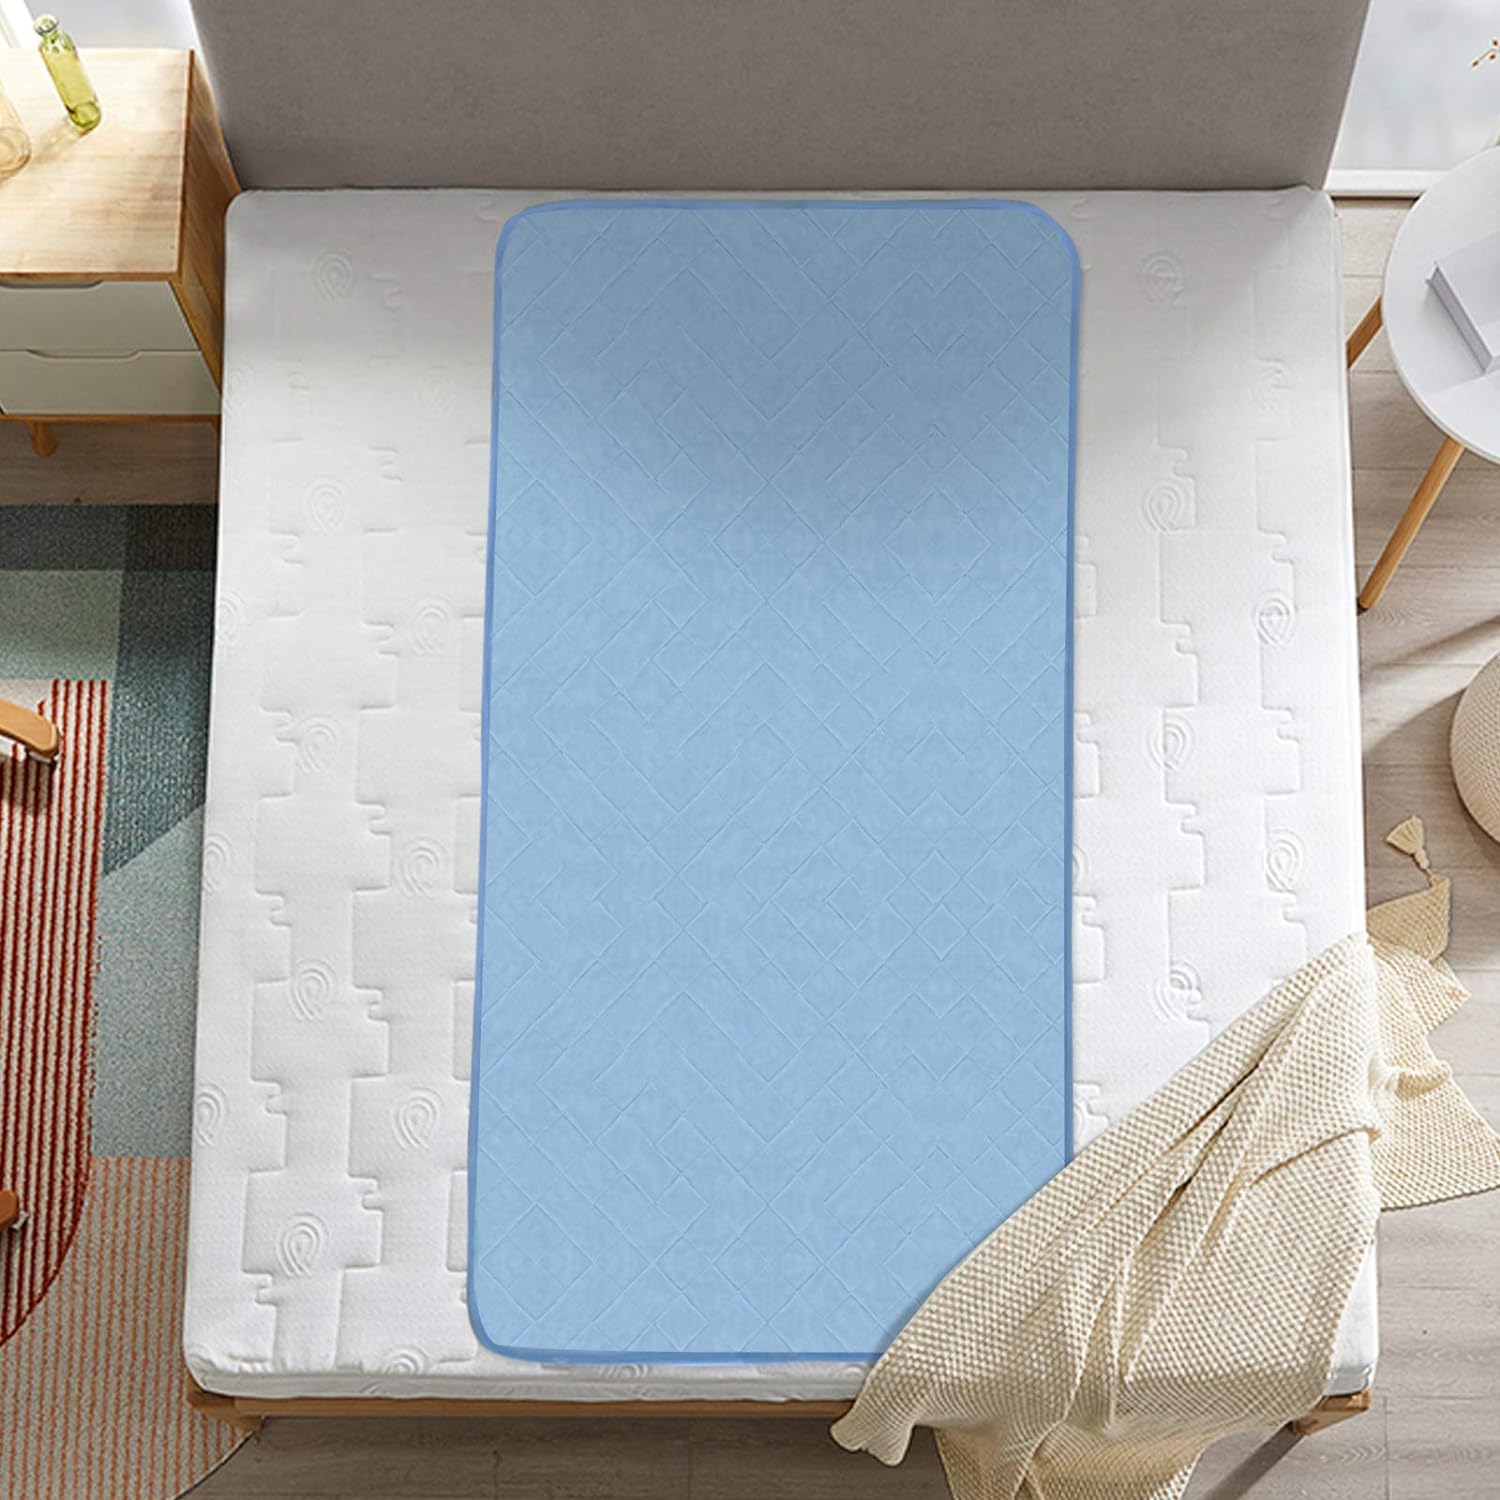 Waterproof Bed Pad/ Mat - Reusable Chuck Pads, Incontinence Underpads, Sheet Protector with Non-slip Back for Adults, Elderly, Kids and Pets, Machine Washable - Biloban Online Store